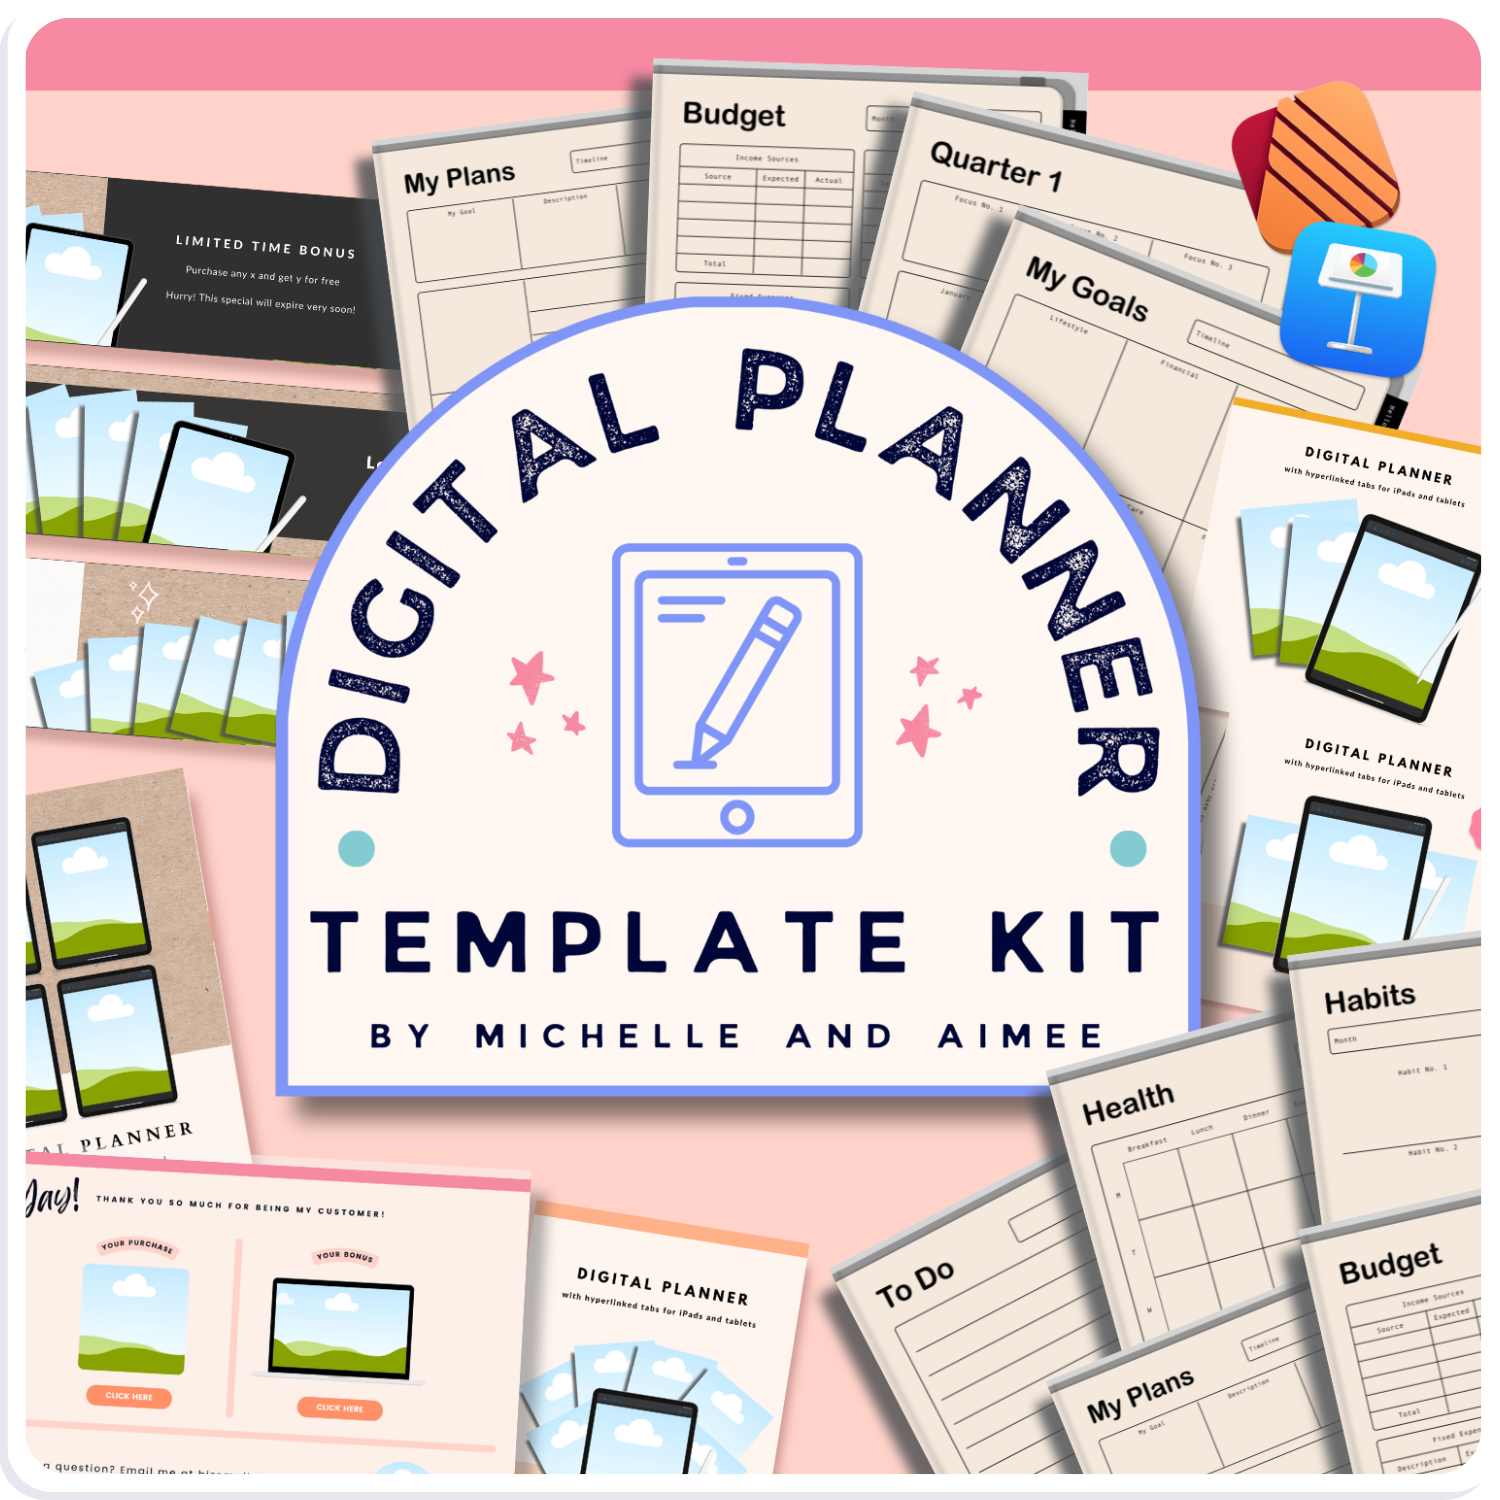 Digital Planner Holiday Badge Stickers